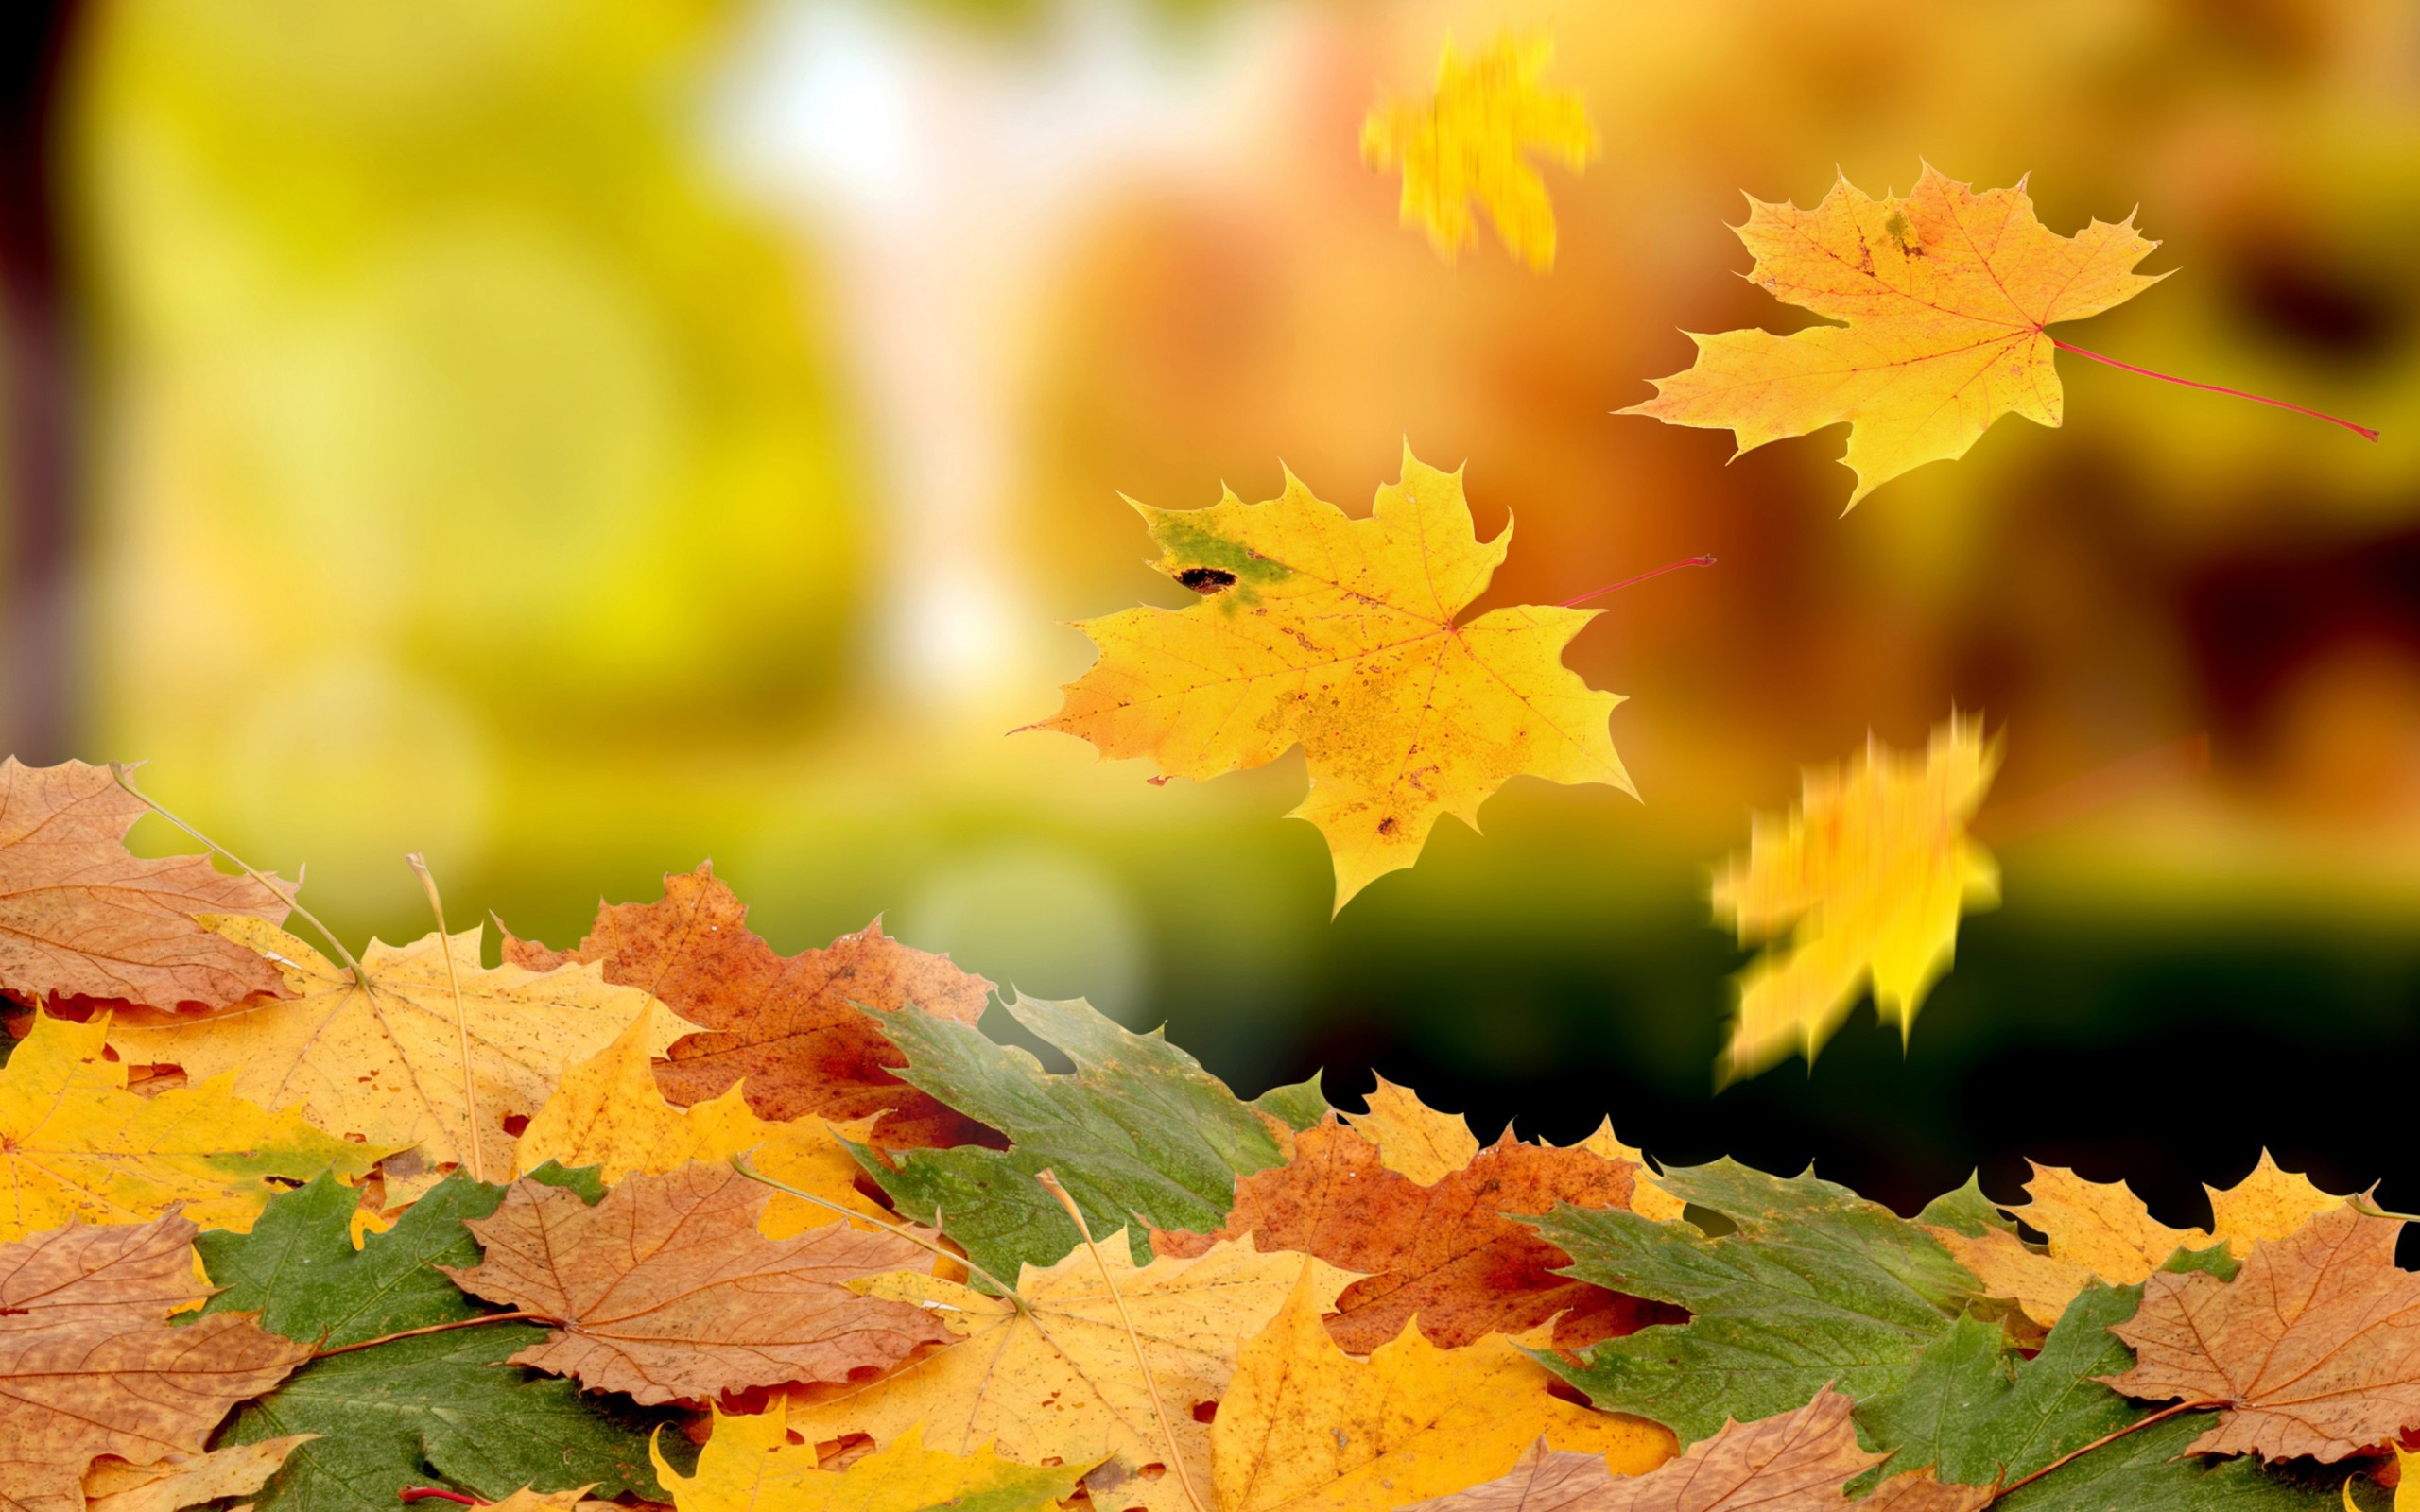 33877 free download Yellow wallpapers for phone, background, leaves, autumn Yellow images and screensavers for mobile